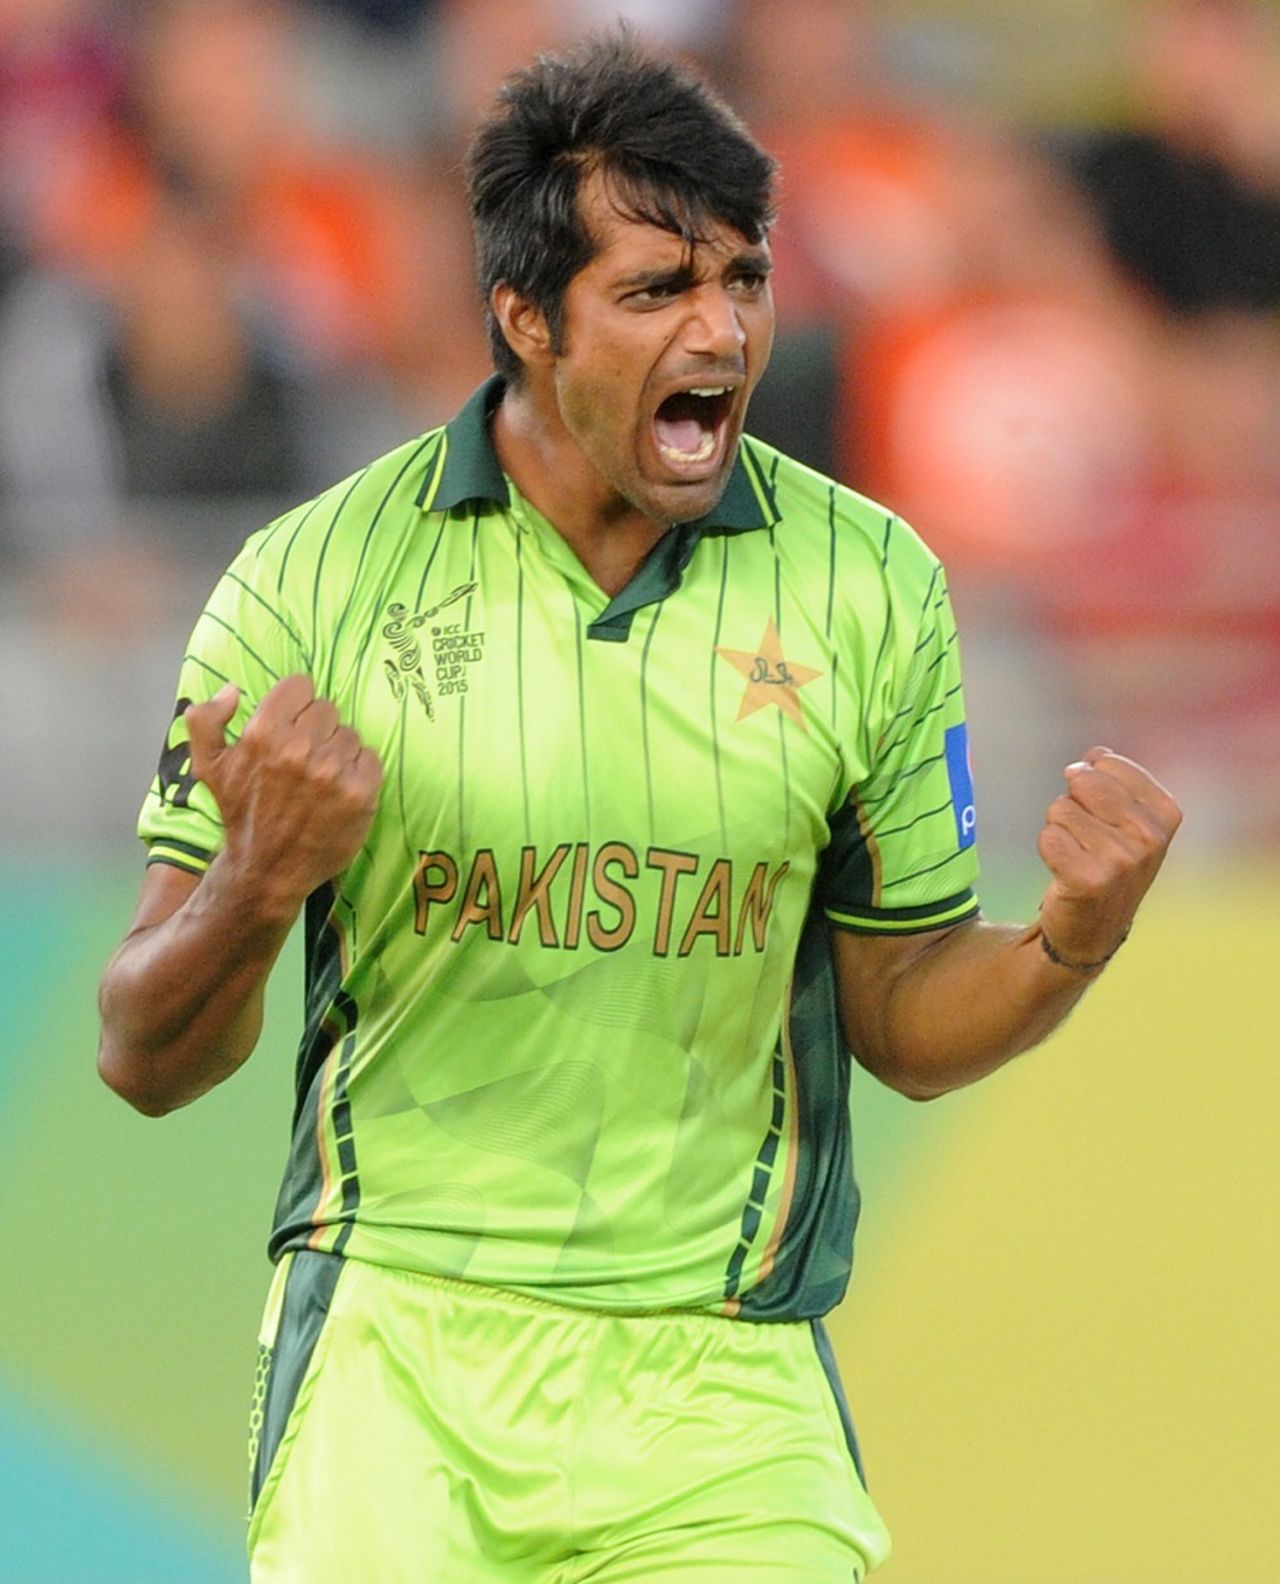 Rahat Ali is exults after having Faf du Plessis caught behind, Pakistan v South Africa, World Cup 2015, Group B, Auckland, March 7, 2015